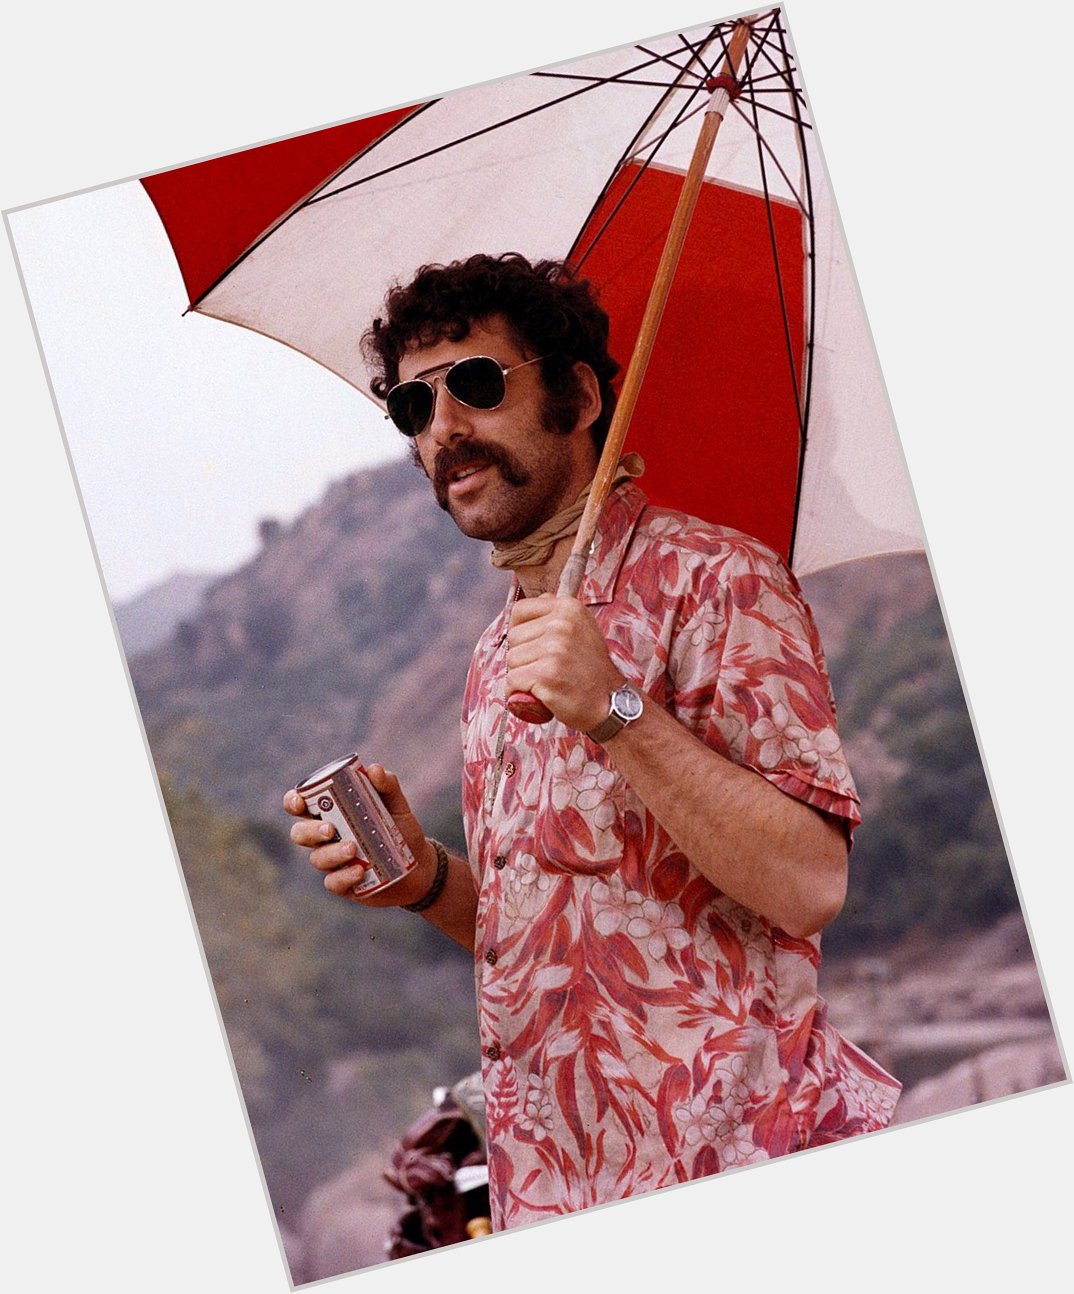 Happy Birthday wishes to Elliott Gould, 84 years young today.  